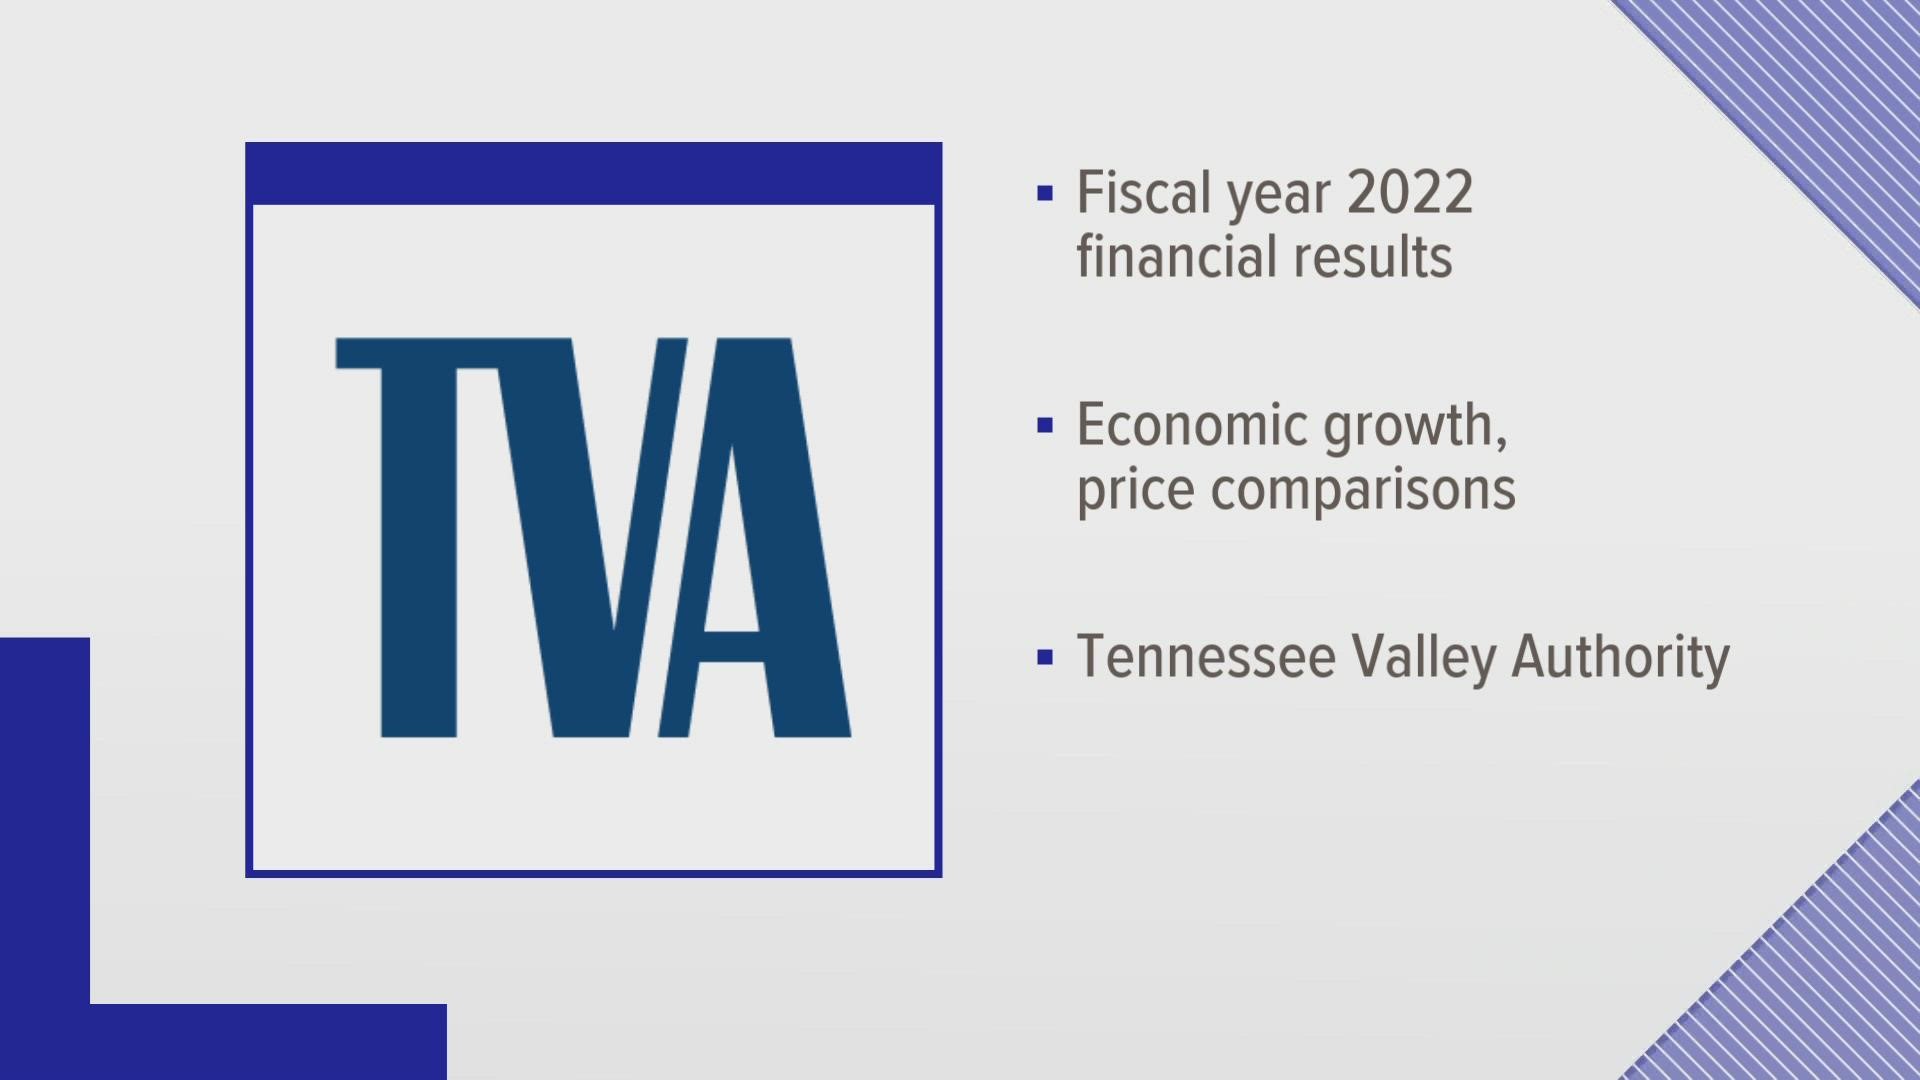 The Tennessee Valley Authority will reveal the economic growth or decline across the city of  Knoxville for 2022 and compare prices to the year prior.